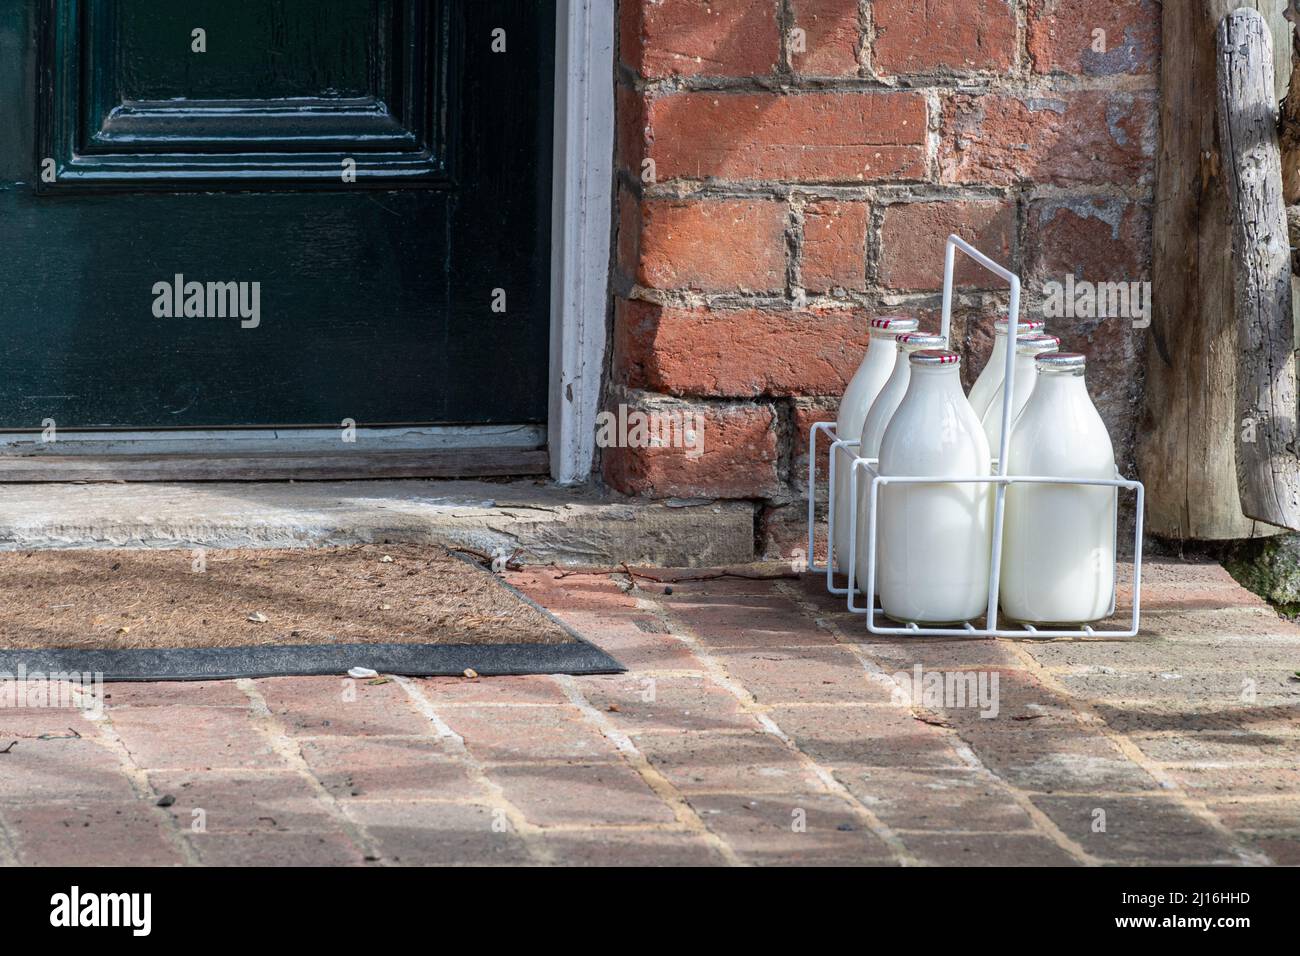 Six bottles of milk (pints of milk) delivered by a milkman and left in a crate on the doorstep of a house, UK Stock Photo